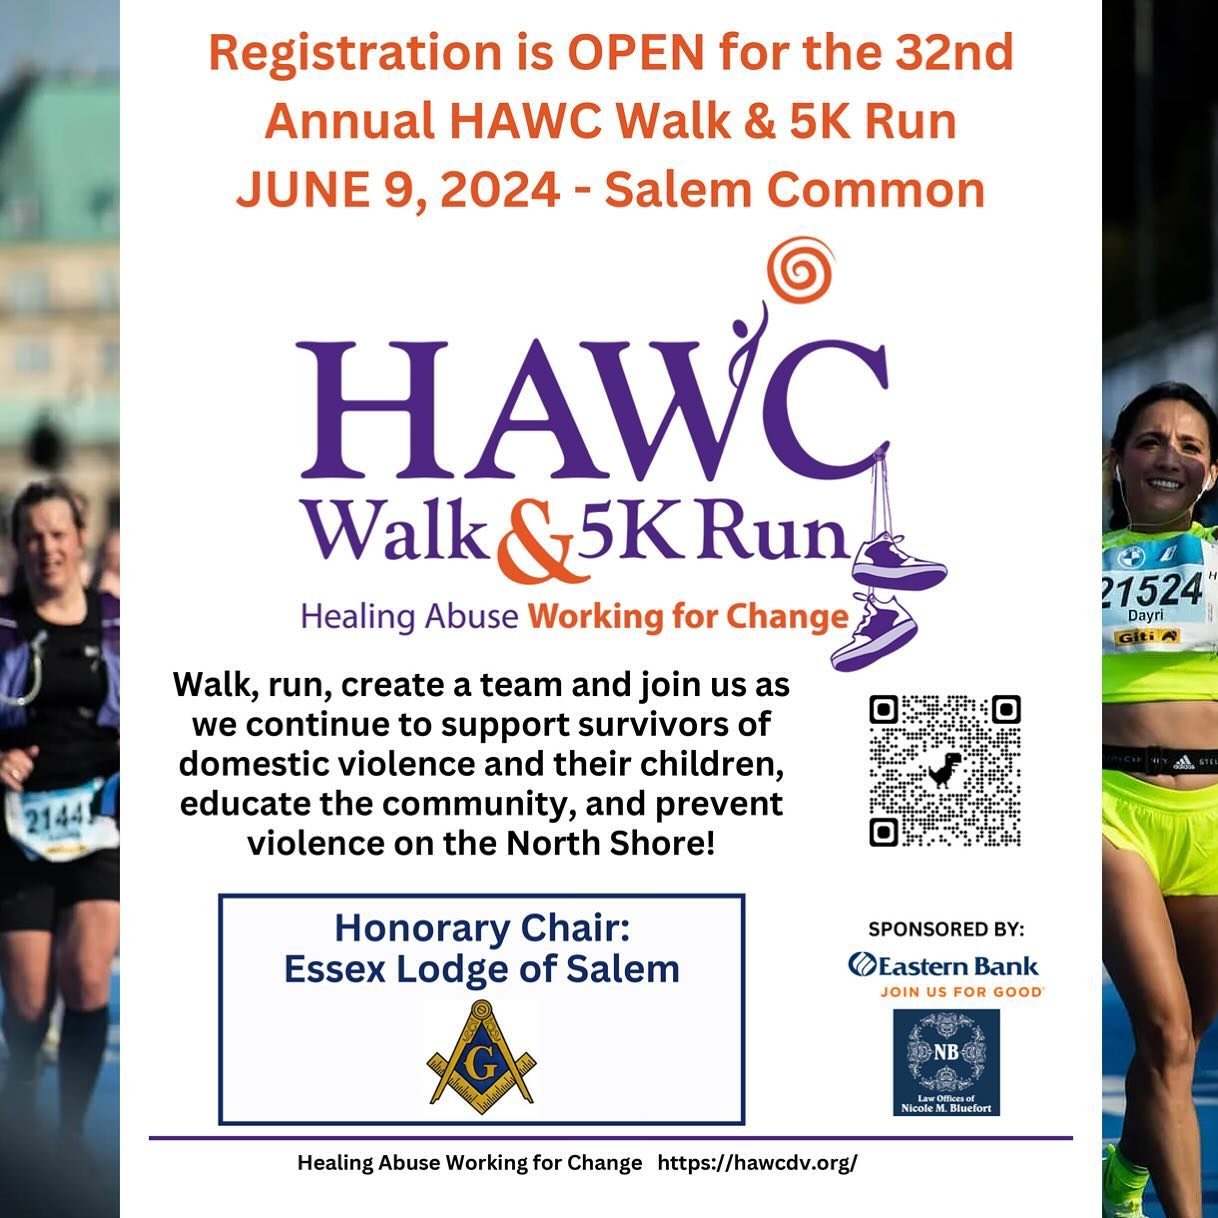 Essex Lodge is excited to be the Honorary Chair of the @hawcnorthshore Walk and 5K Run on June 9, 2024!

&ldquo;Walk, run, create a team and join us as we continue to support survivors of domestic violence and their children, educate the community, a